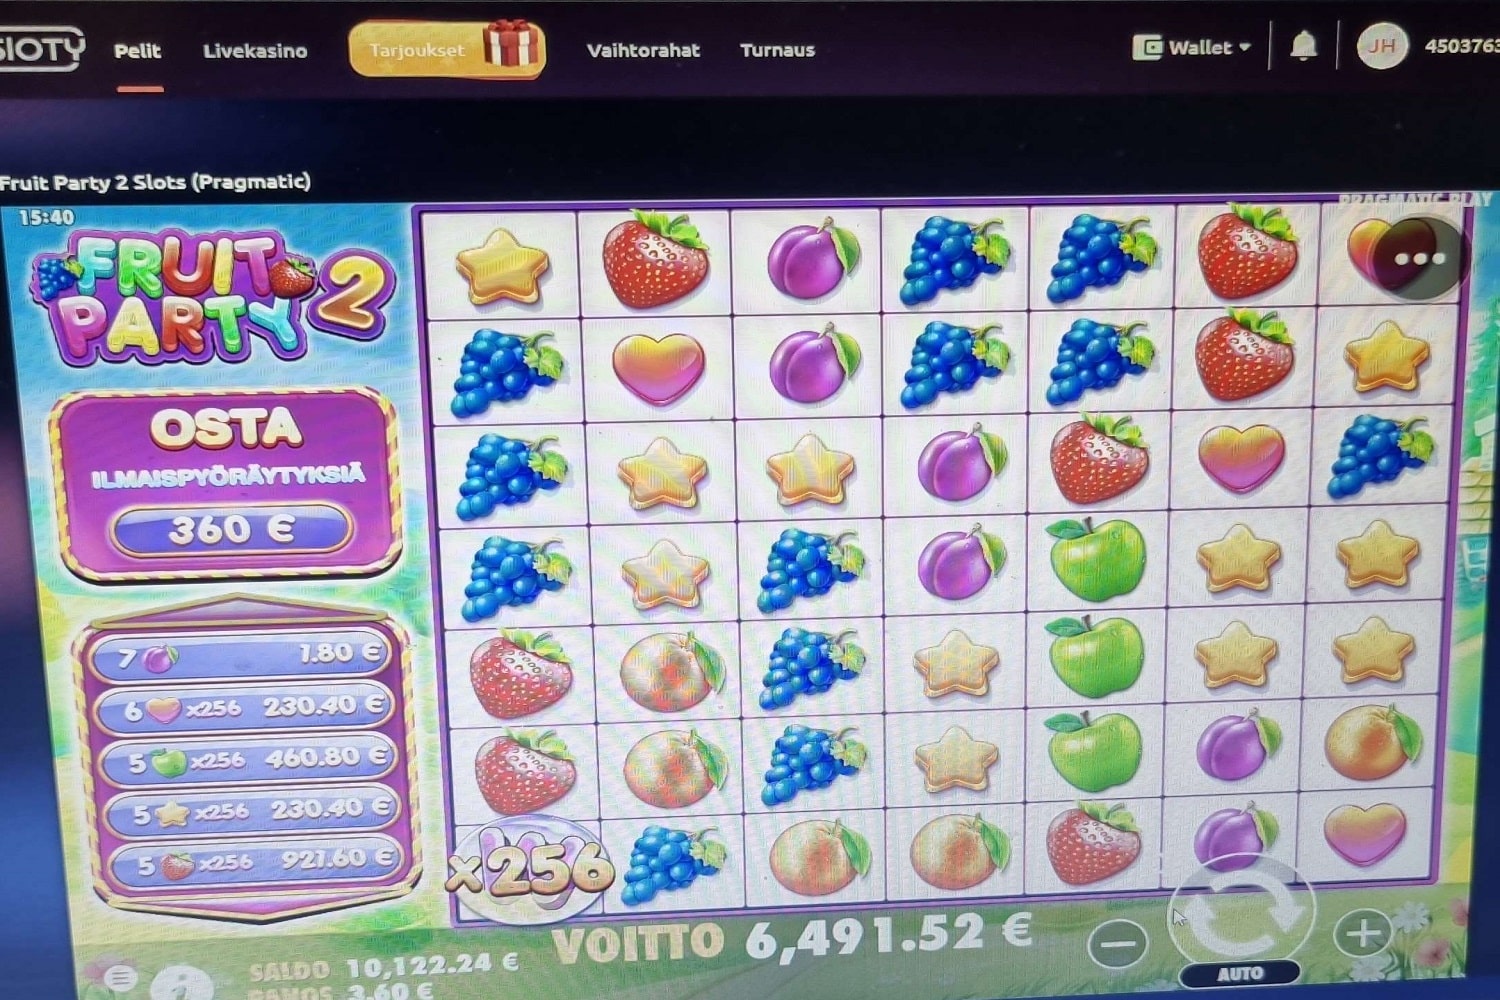 Fruit Party 2 Casino win picture by holari993 6491.52€ 1803.2x 24.12.2022 Sloty